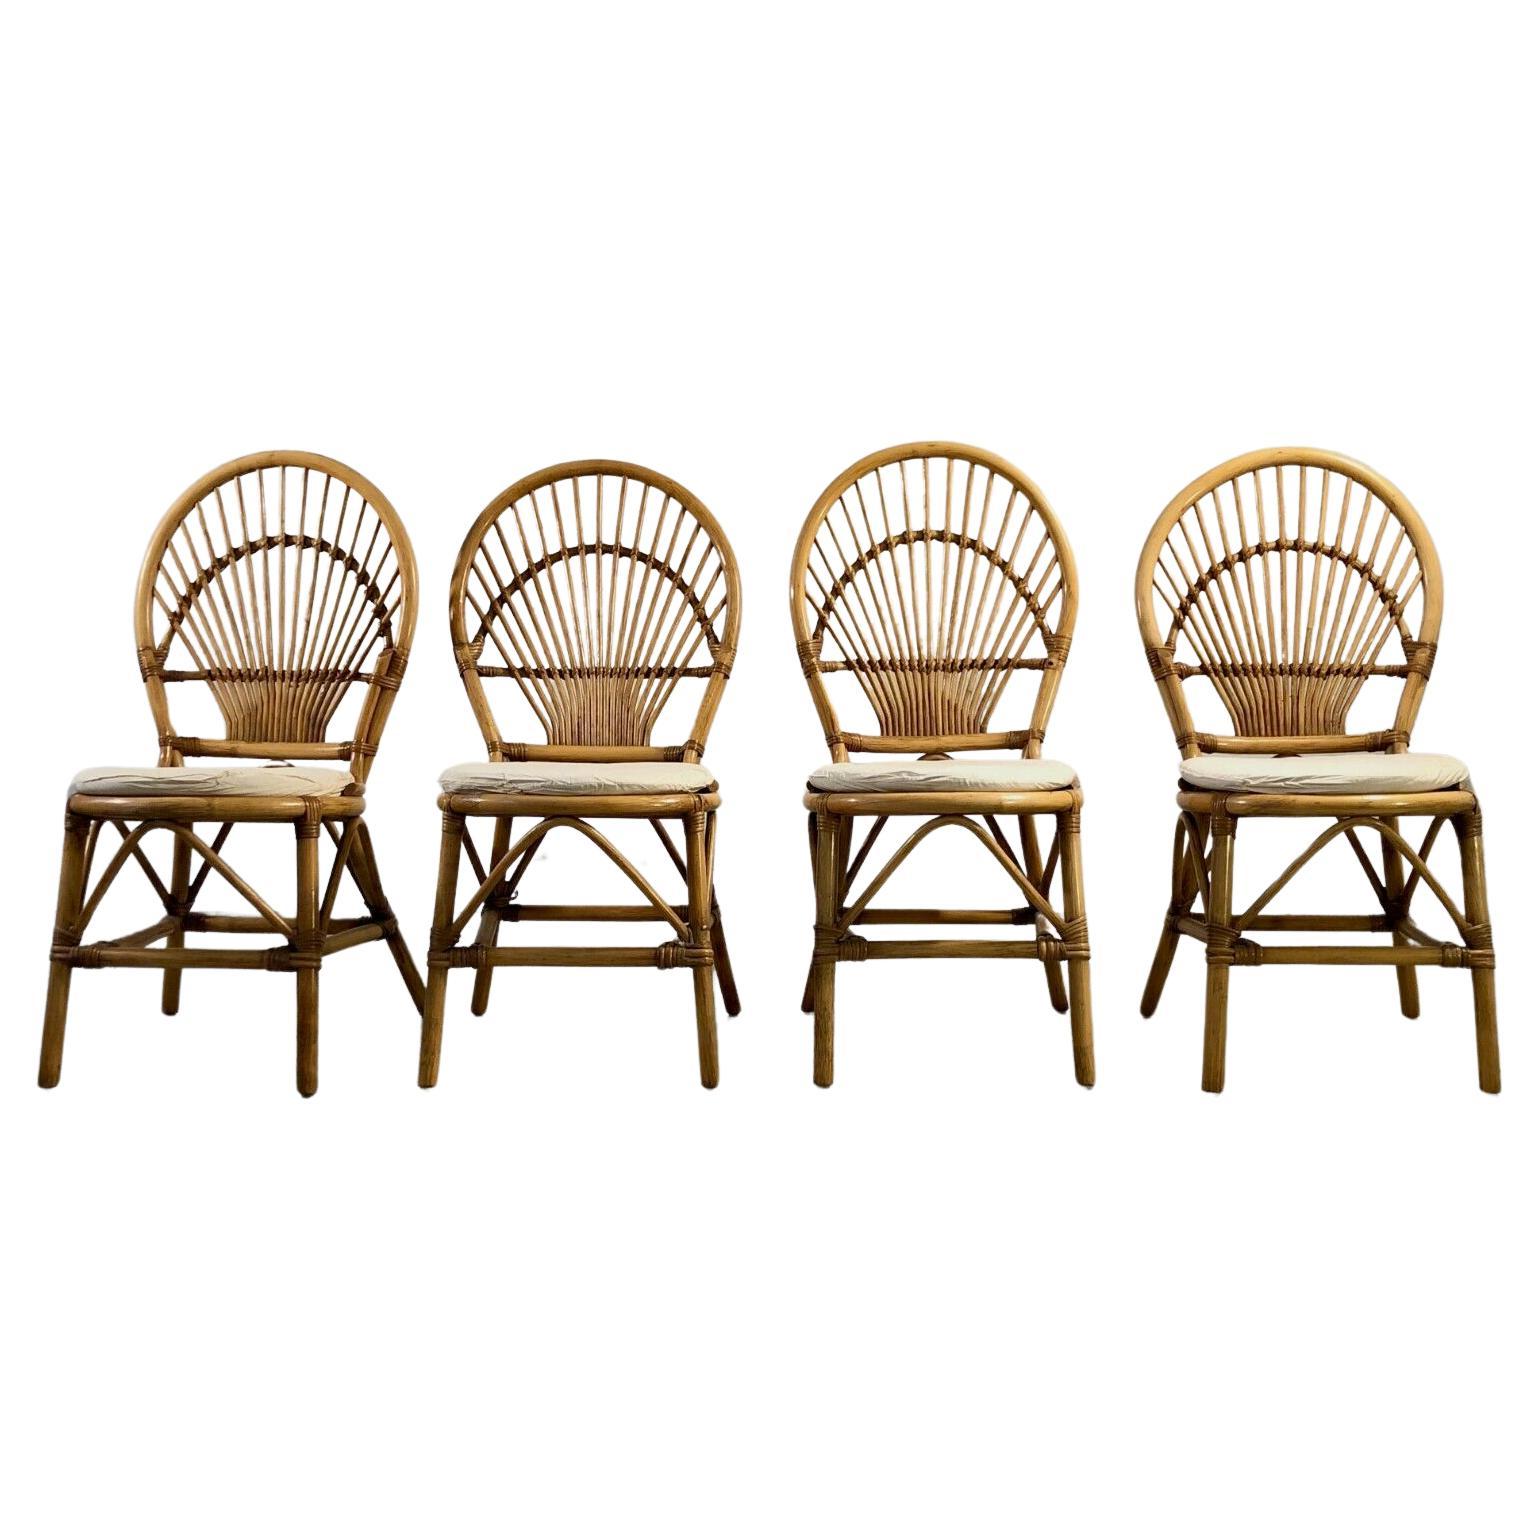 A Set of 4 SHABBY-CHIC BAMBOO Chairs in AUDOUX-MINNET Style, France 1970 For Sale